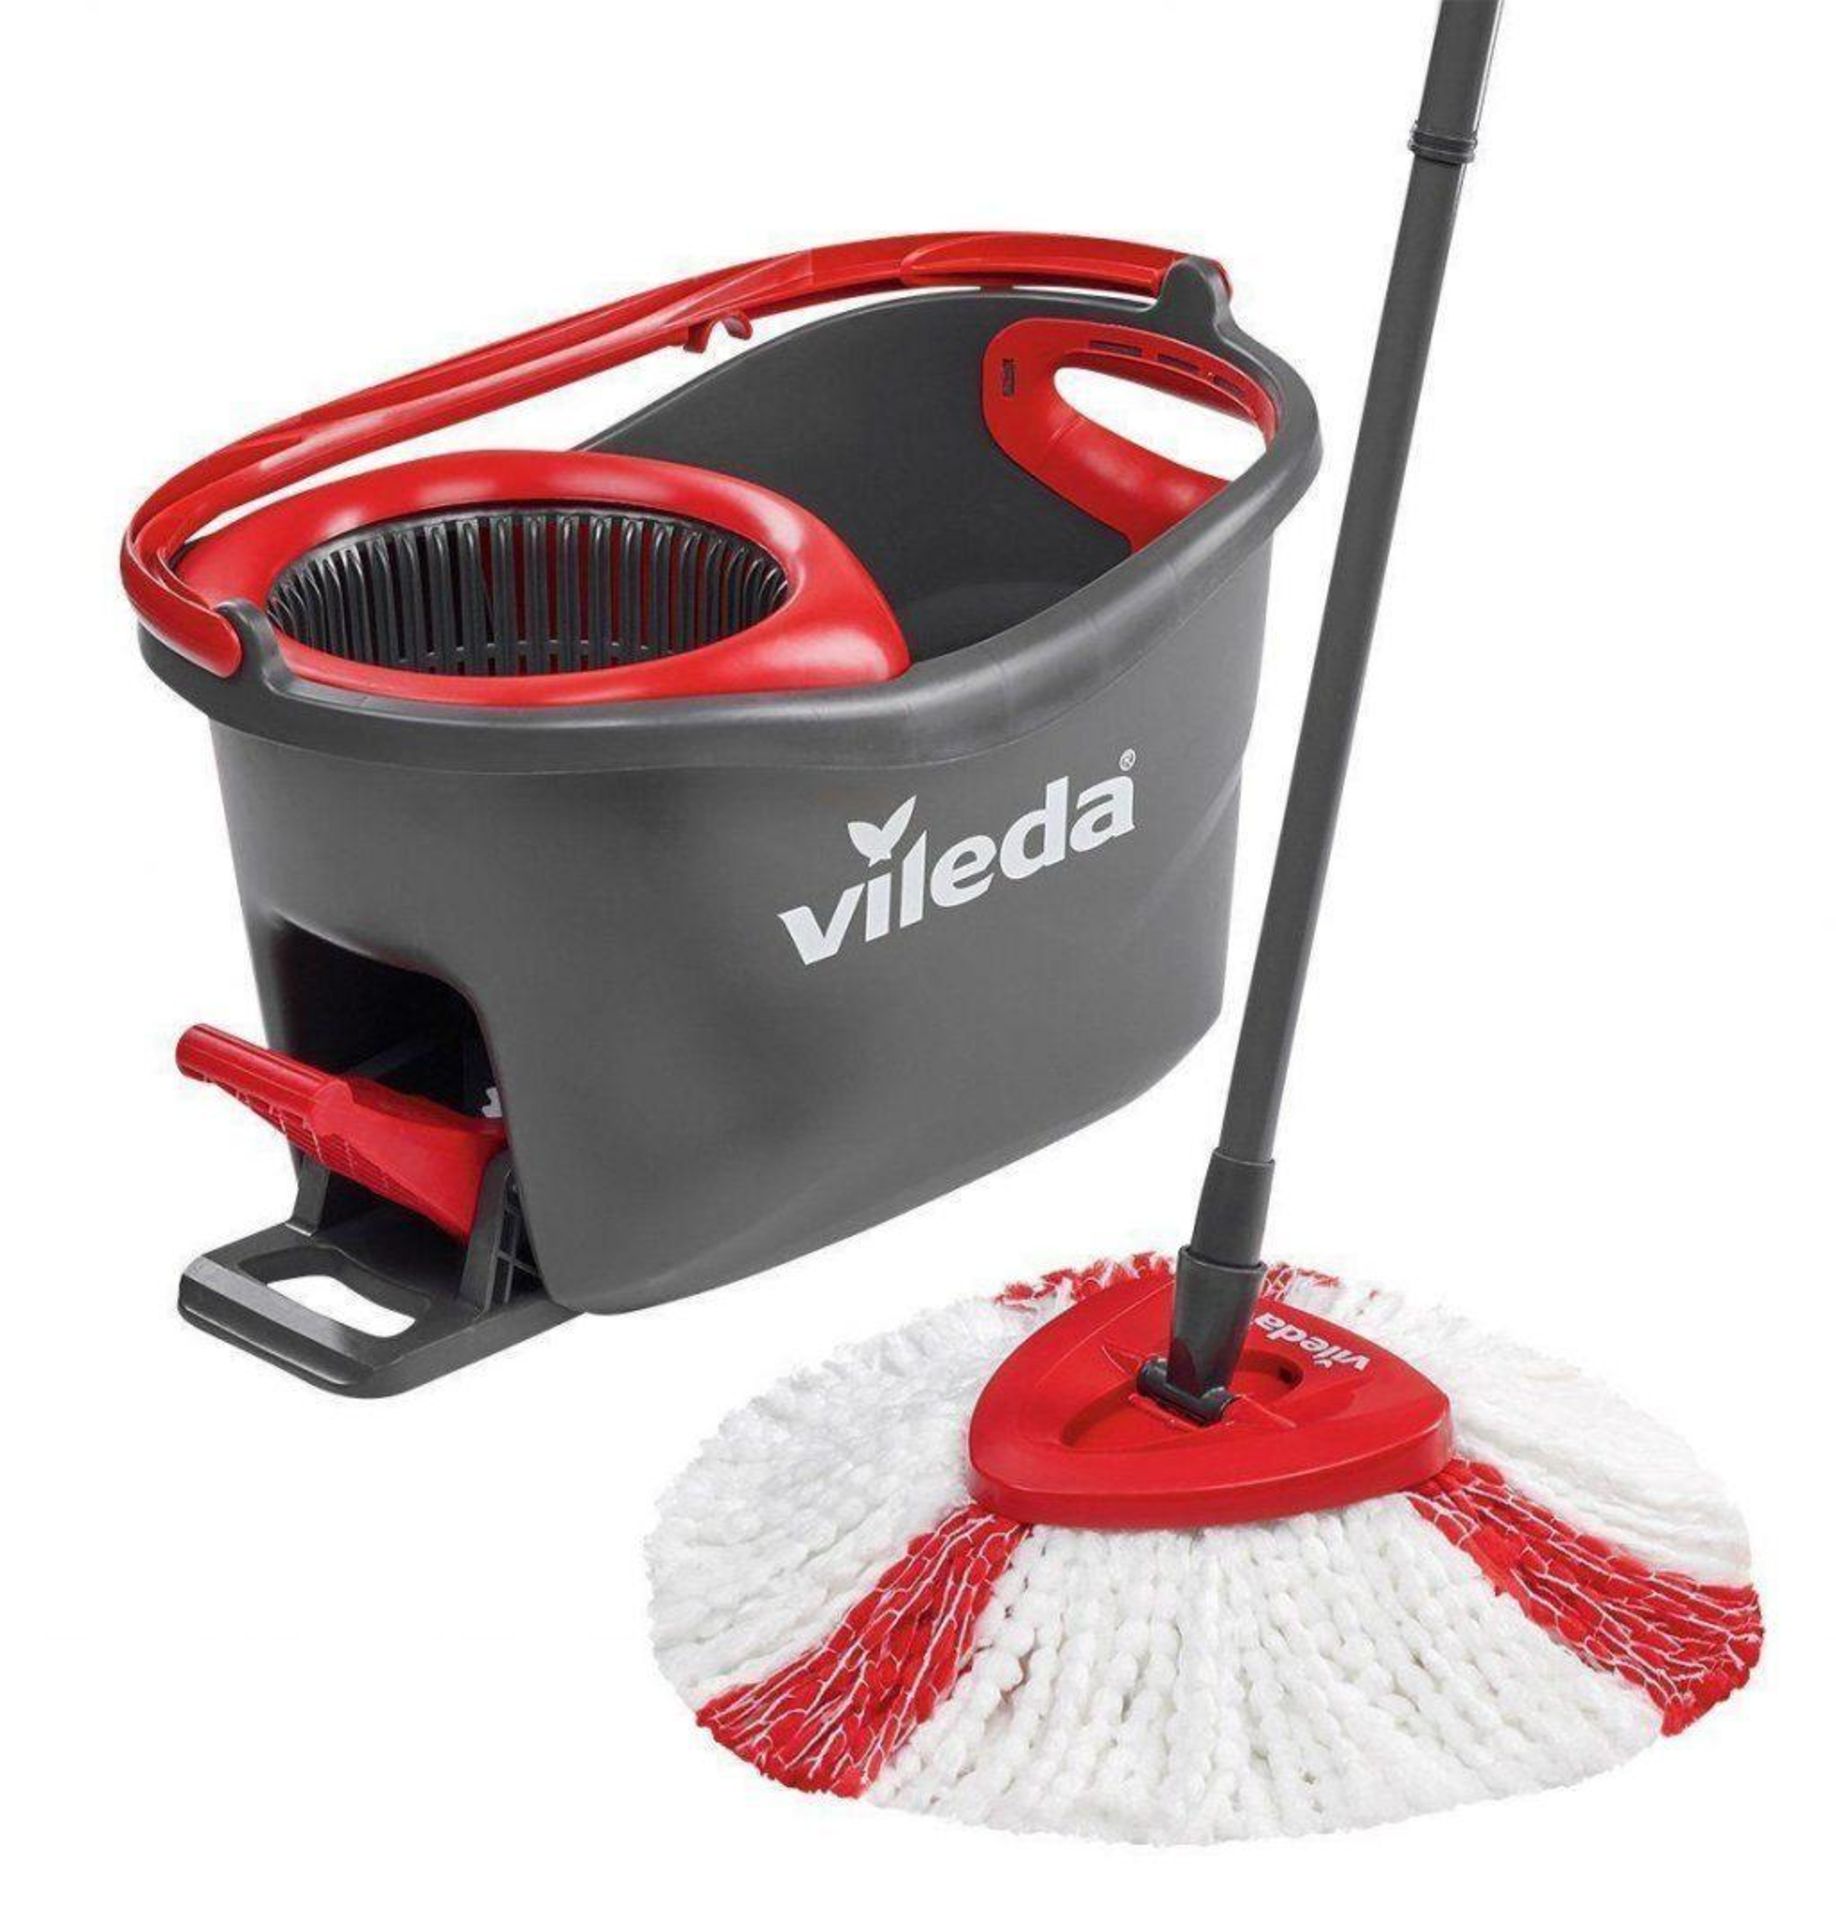 Vileda EasyWring and Clean Turbo Spin Mop and Bucket £32.93 RRP